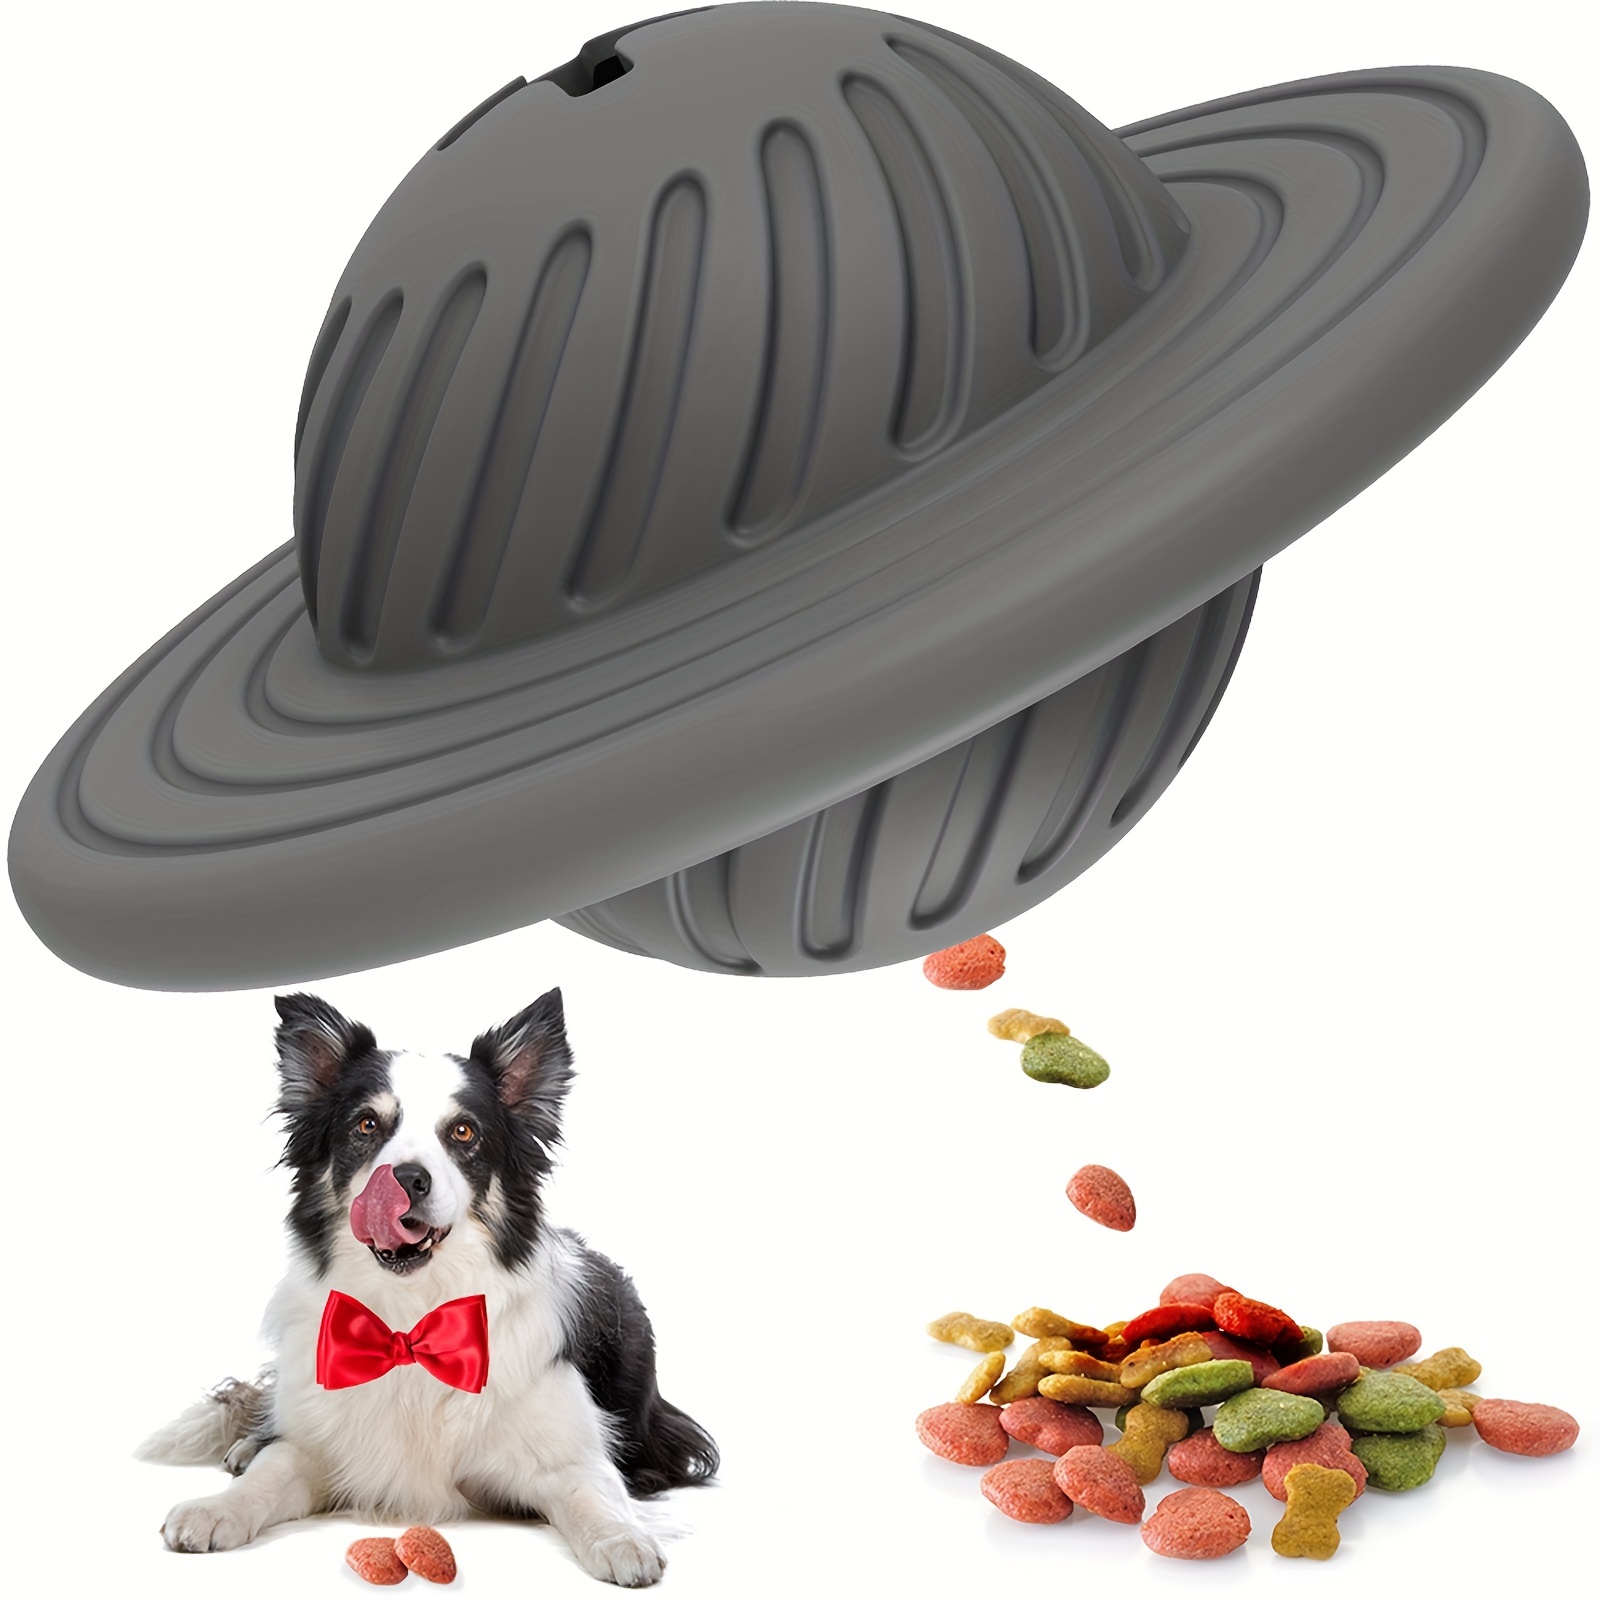 

Interactive Ufo Shaped Rubber Dog Chew Toy With Treat Dispenser - Durable Pet Teeth Cleaning And Chewing Toy For All Breed Sizes